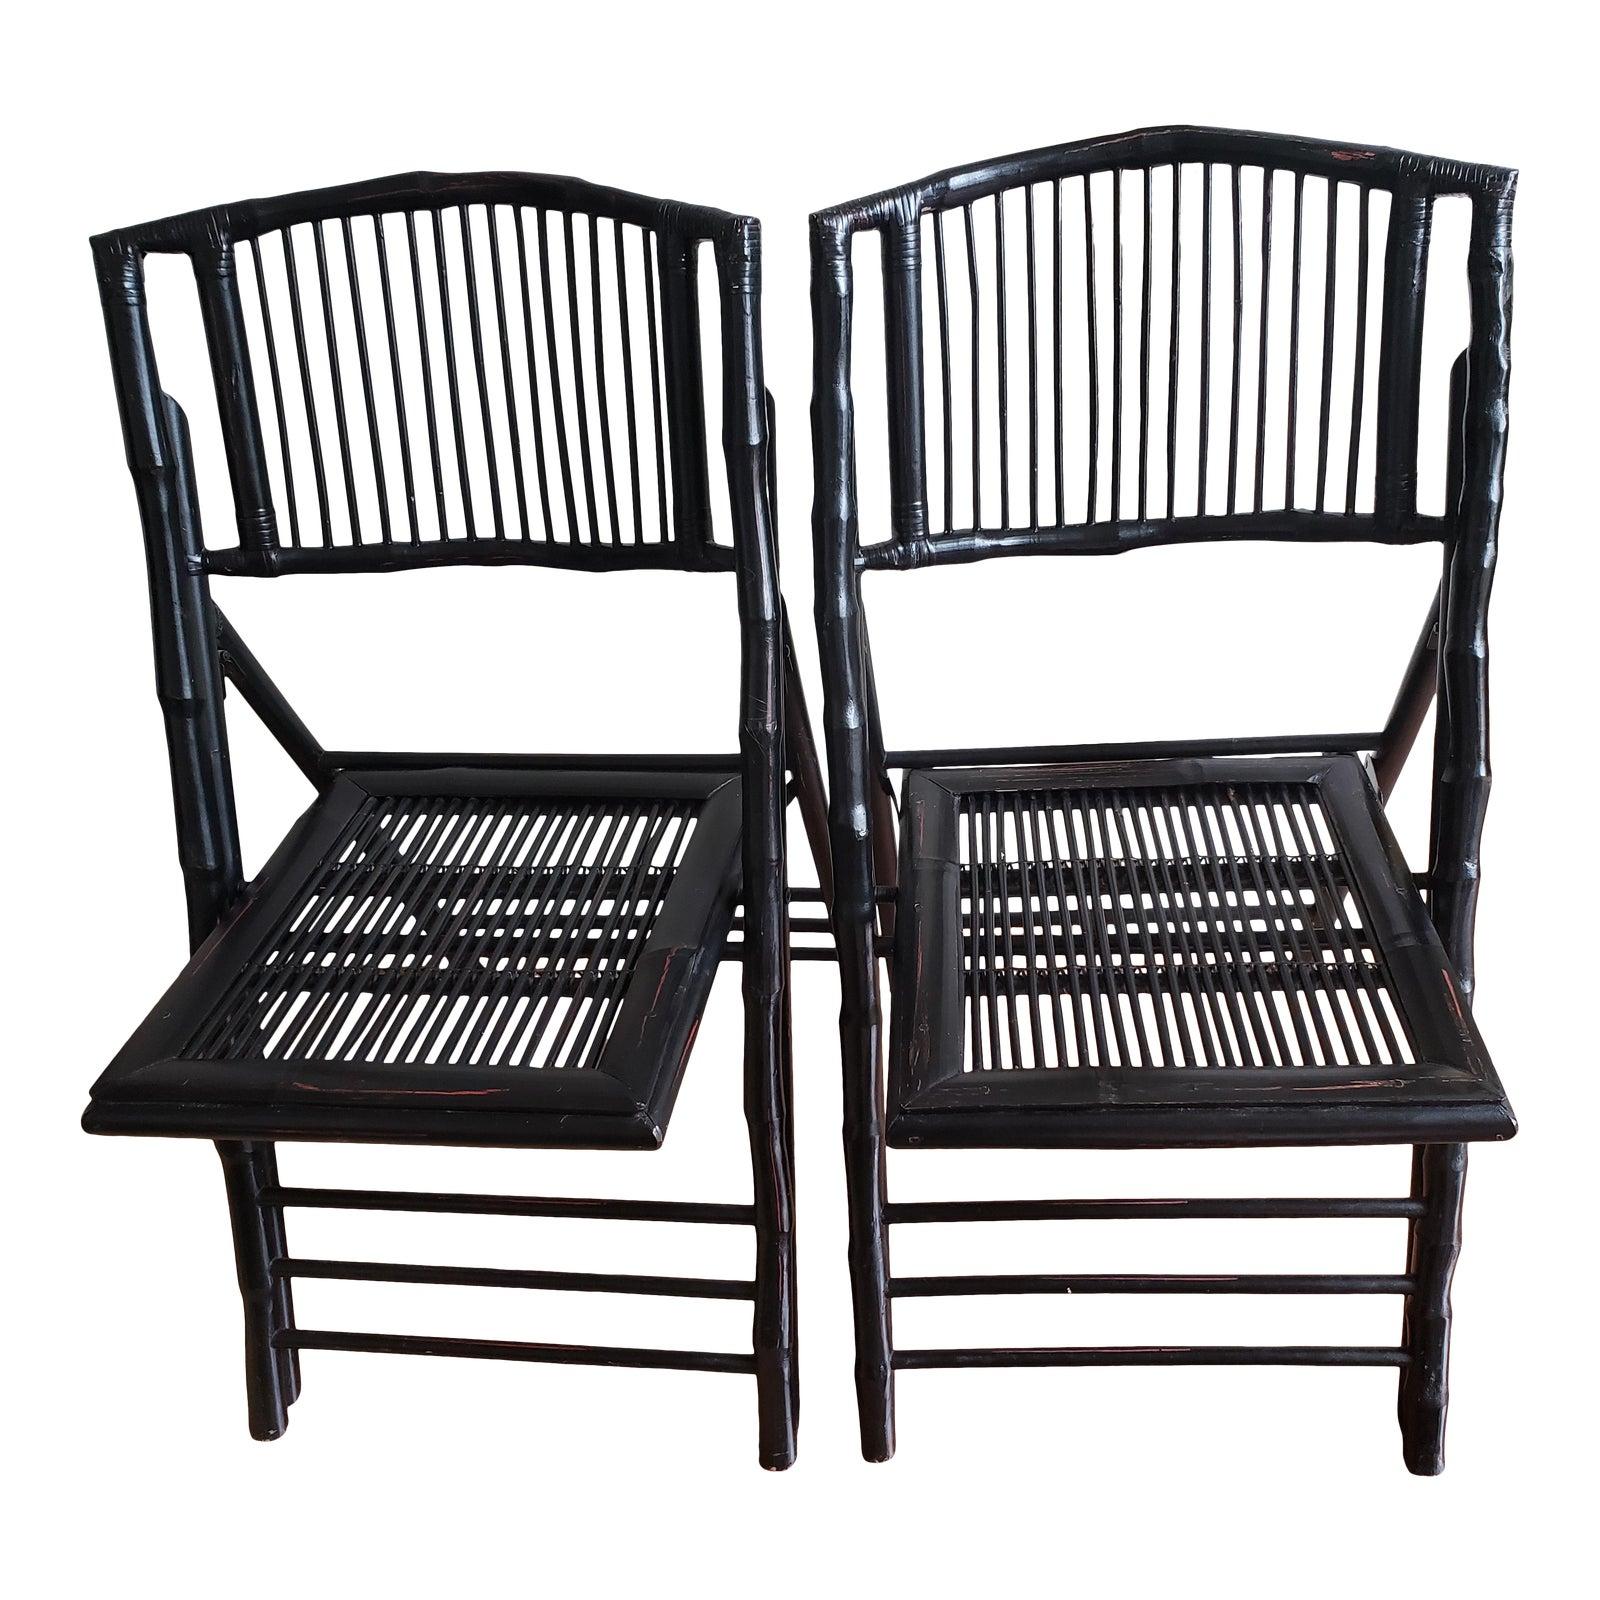 Vintage Bow Back Tortoise Bamboo Folding Chairs, a Pair For Sale